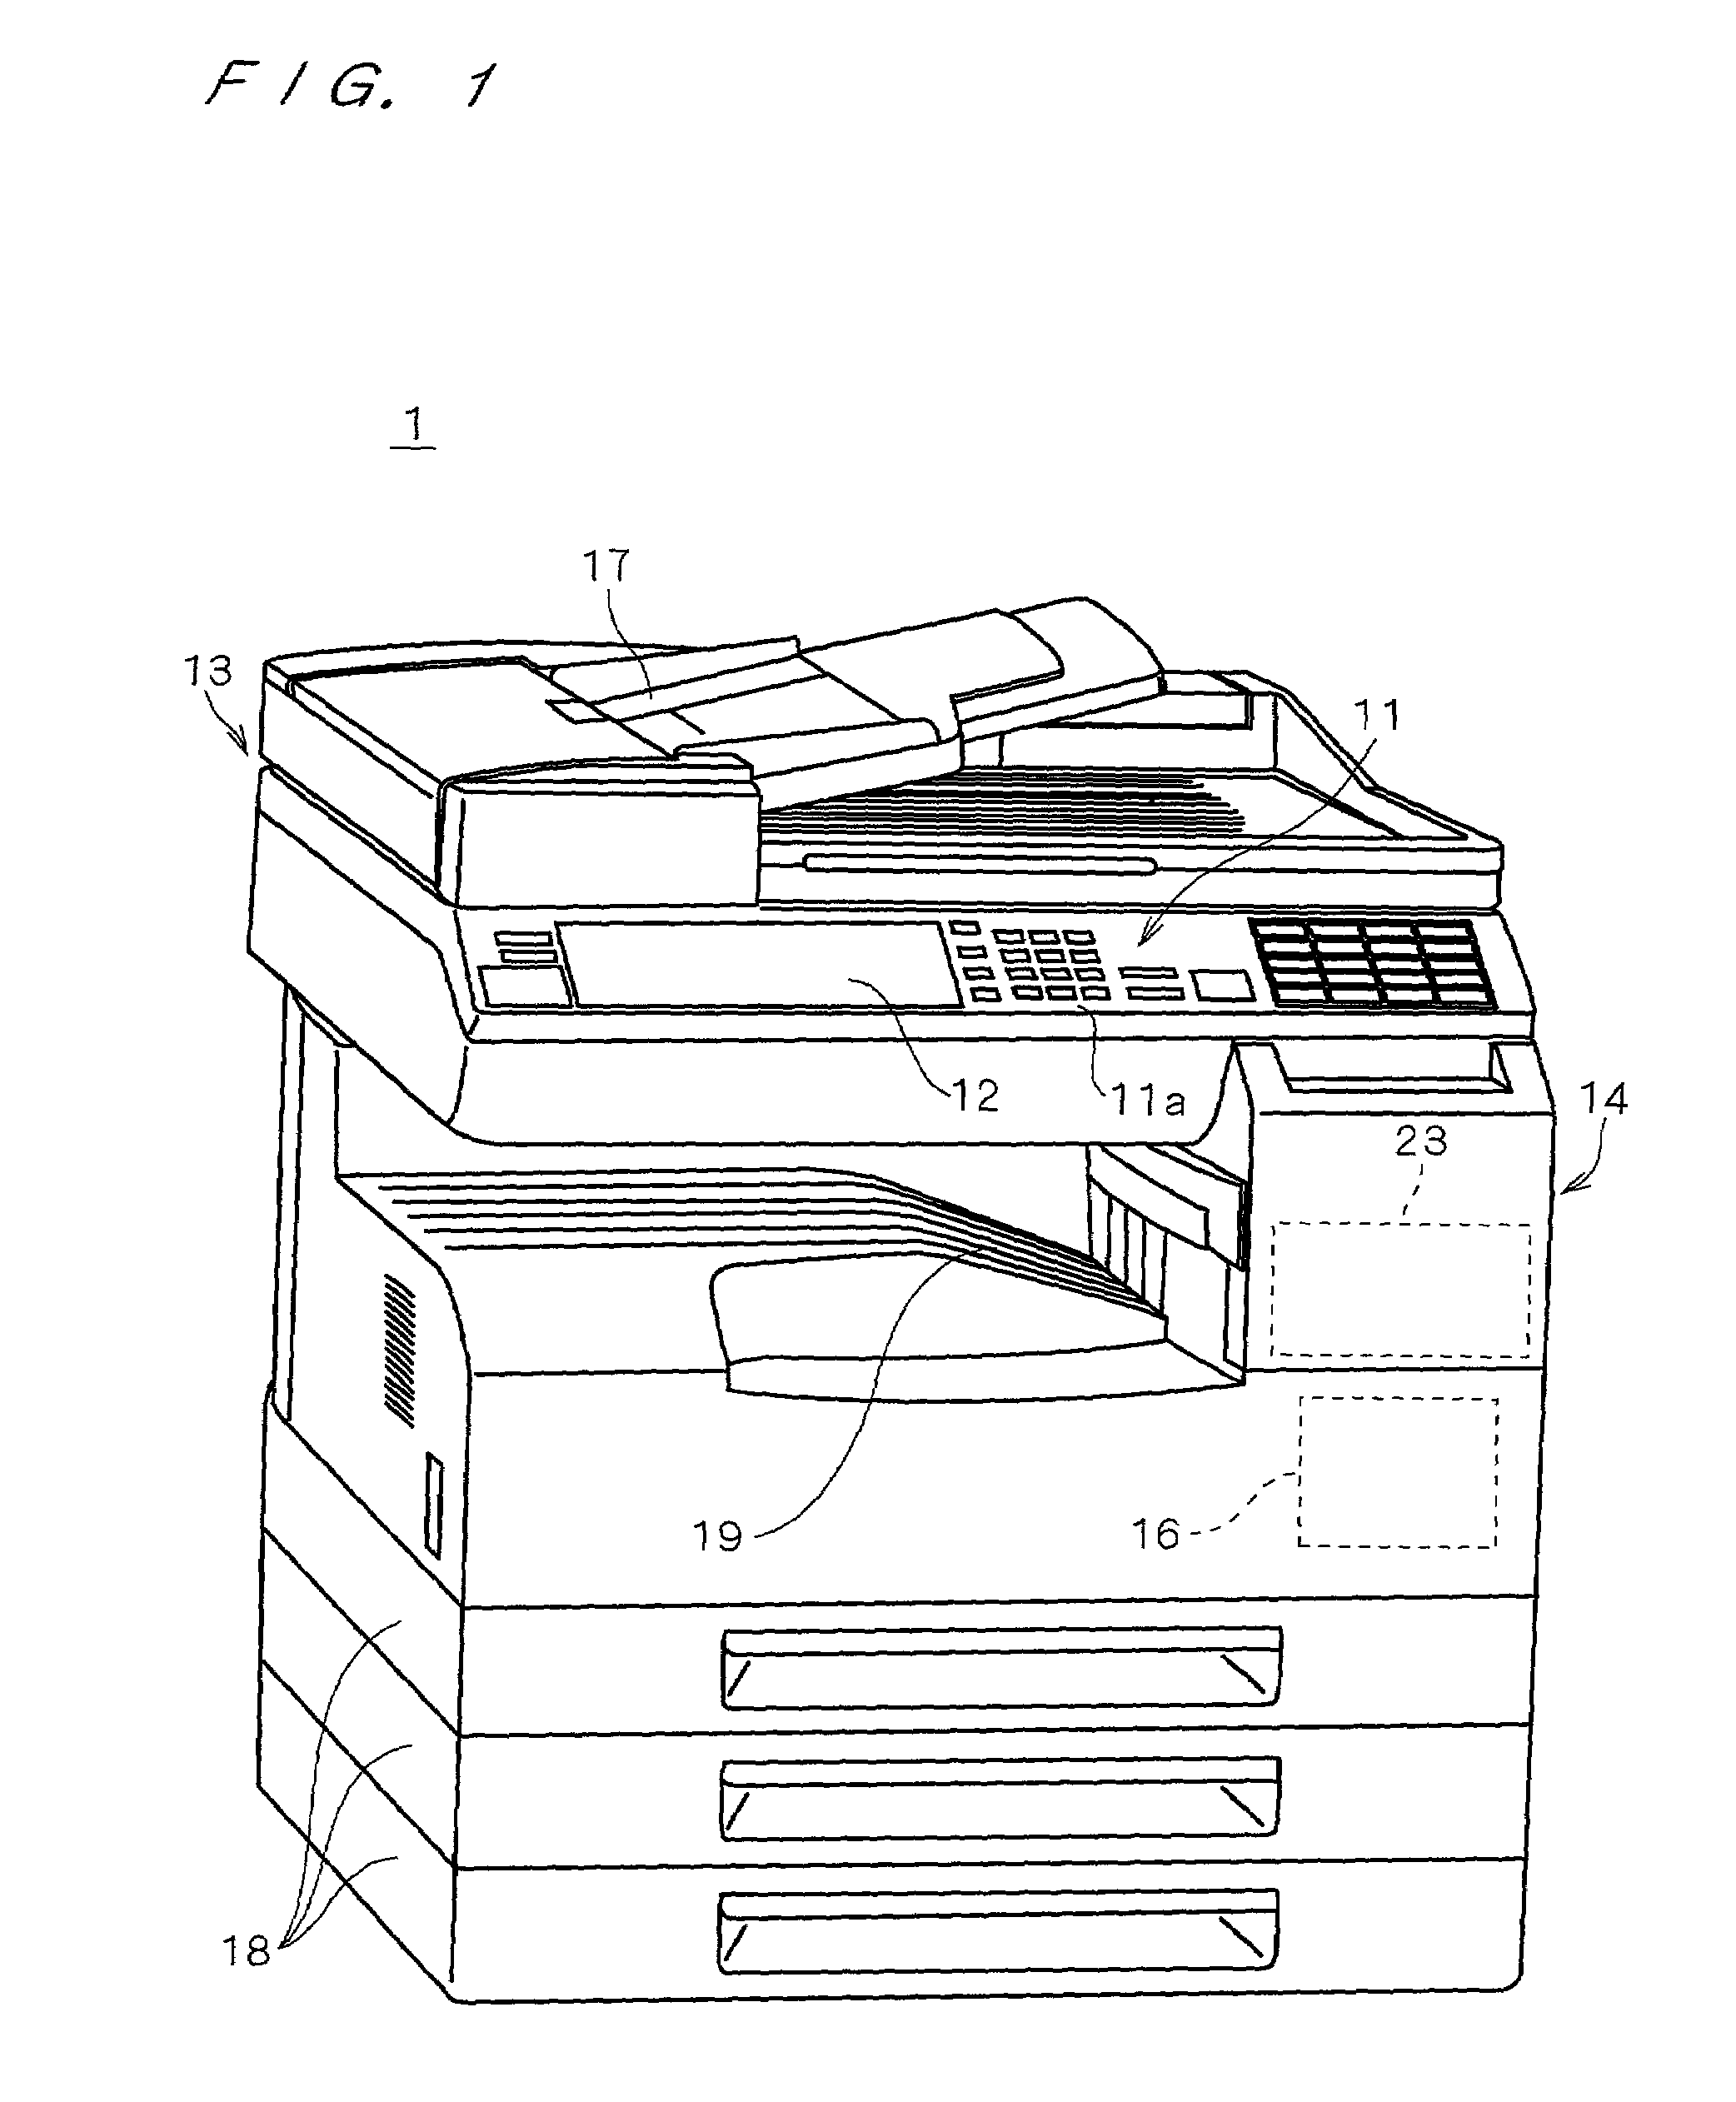 Electronic mail sending apparatus and method